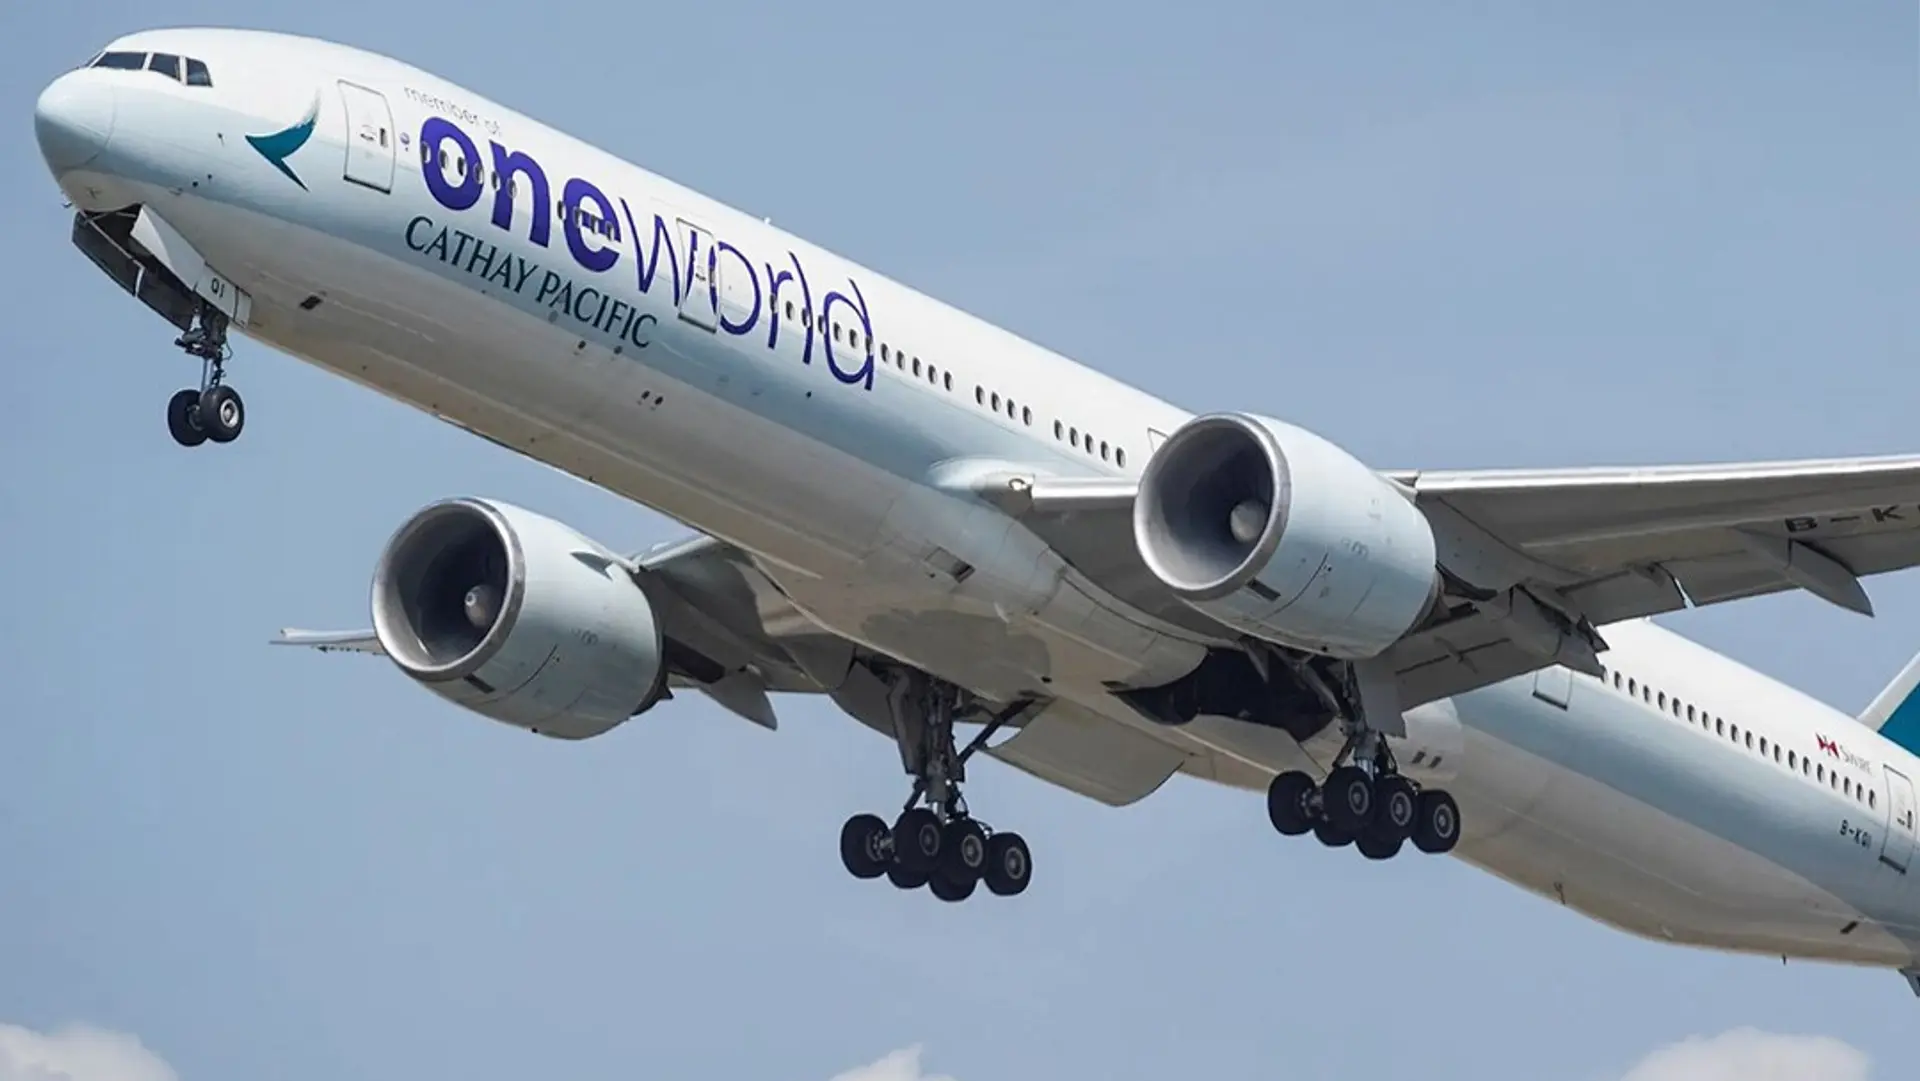 Airlines News - oneworld and The Connaught, London mix sweet cocktails together